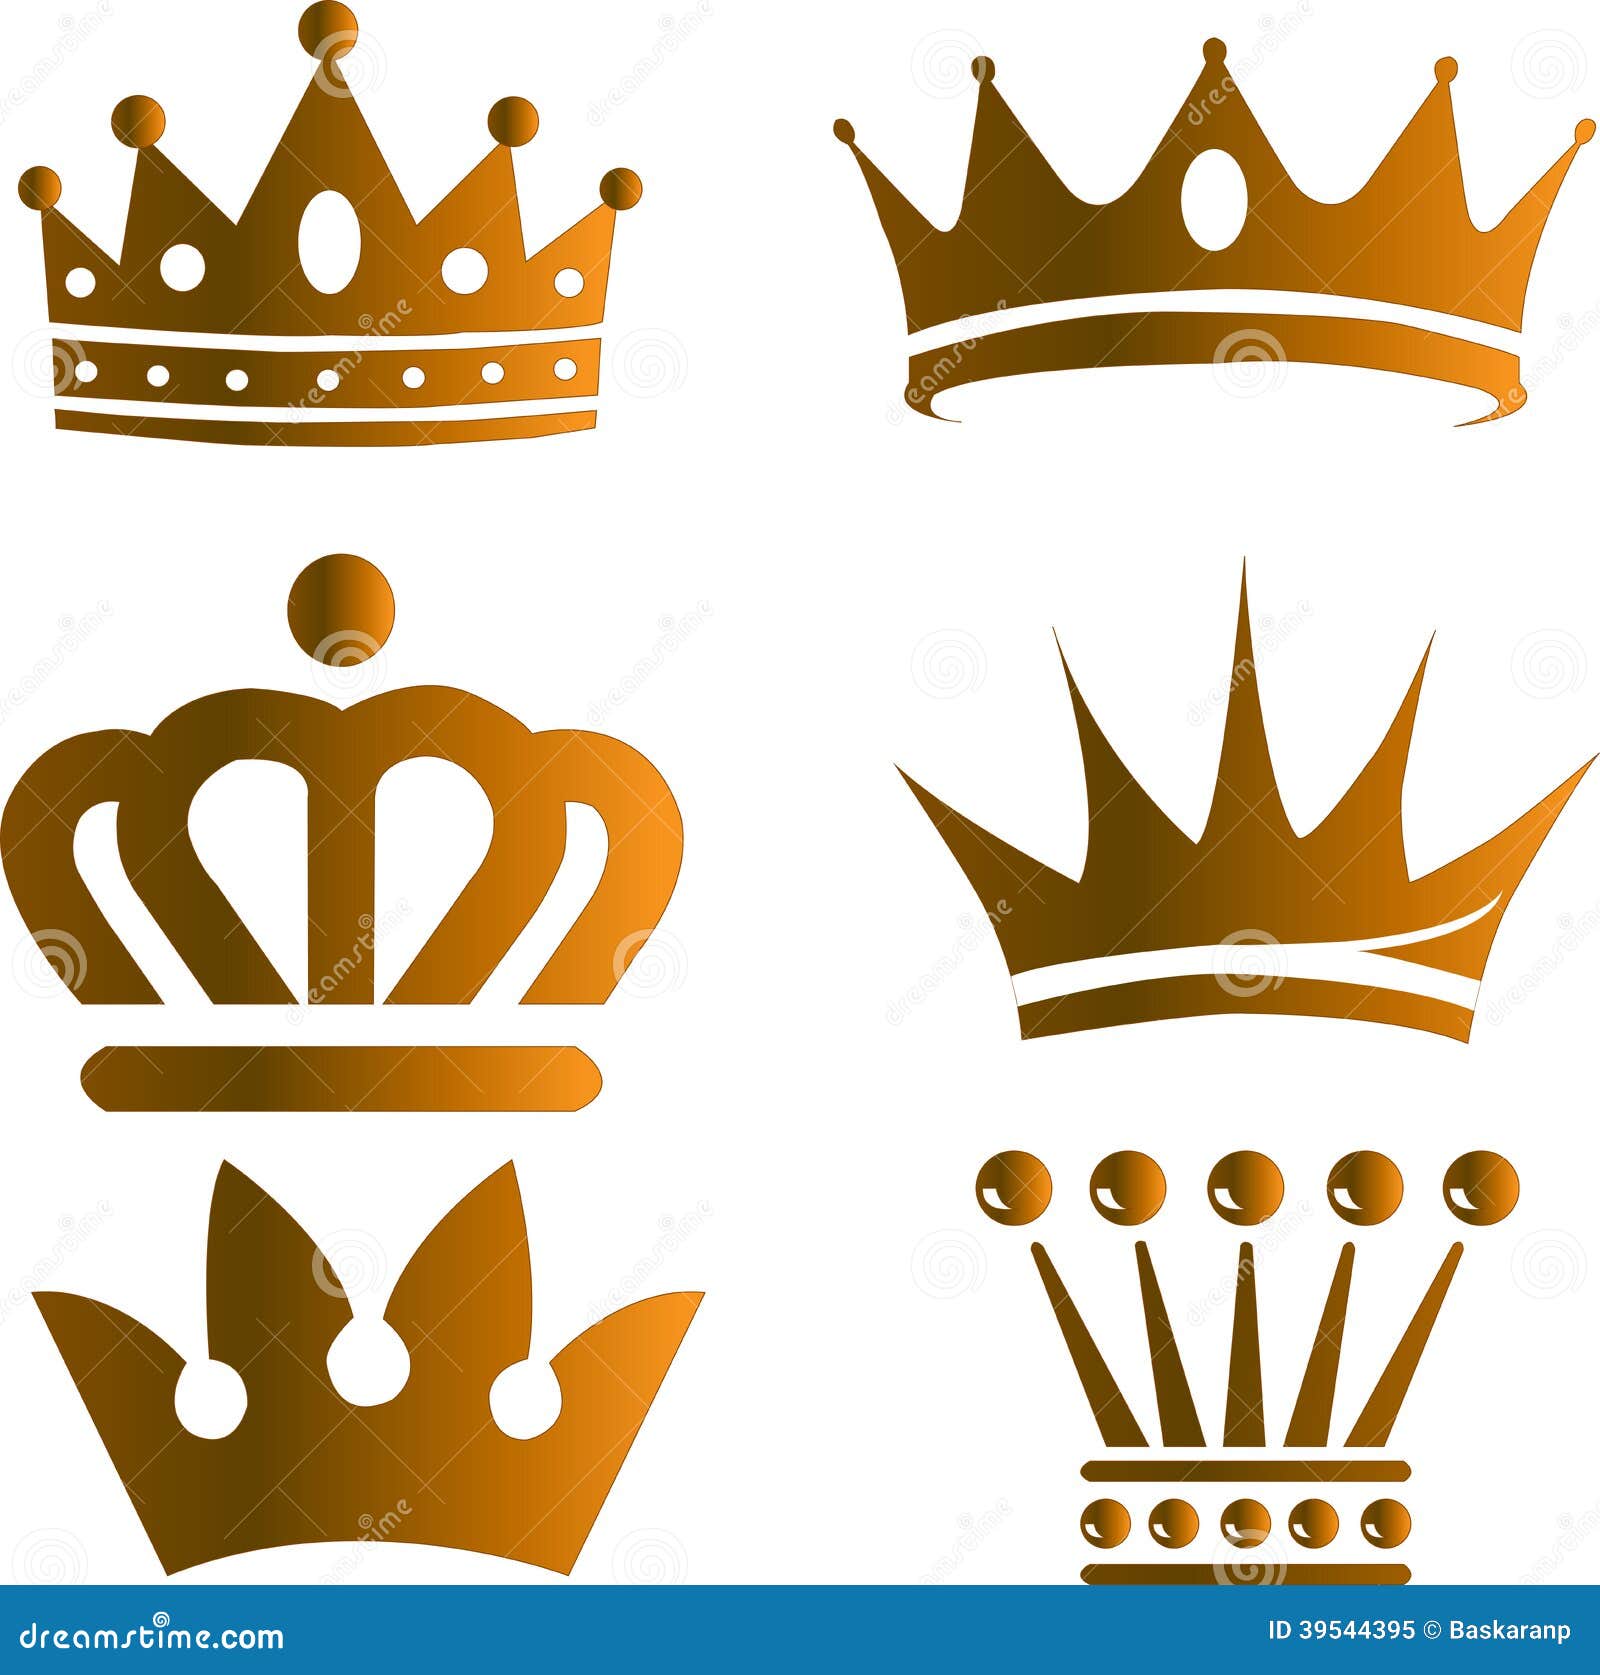 Download Gold Crown Stock Vector - Image: 39544395